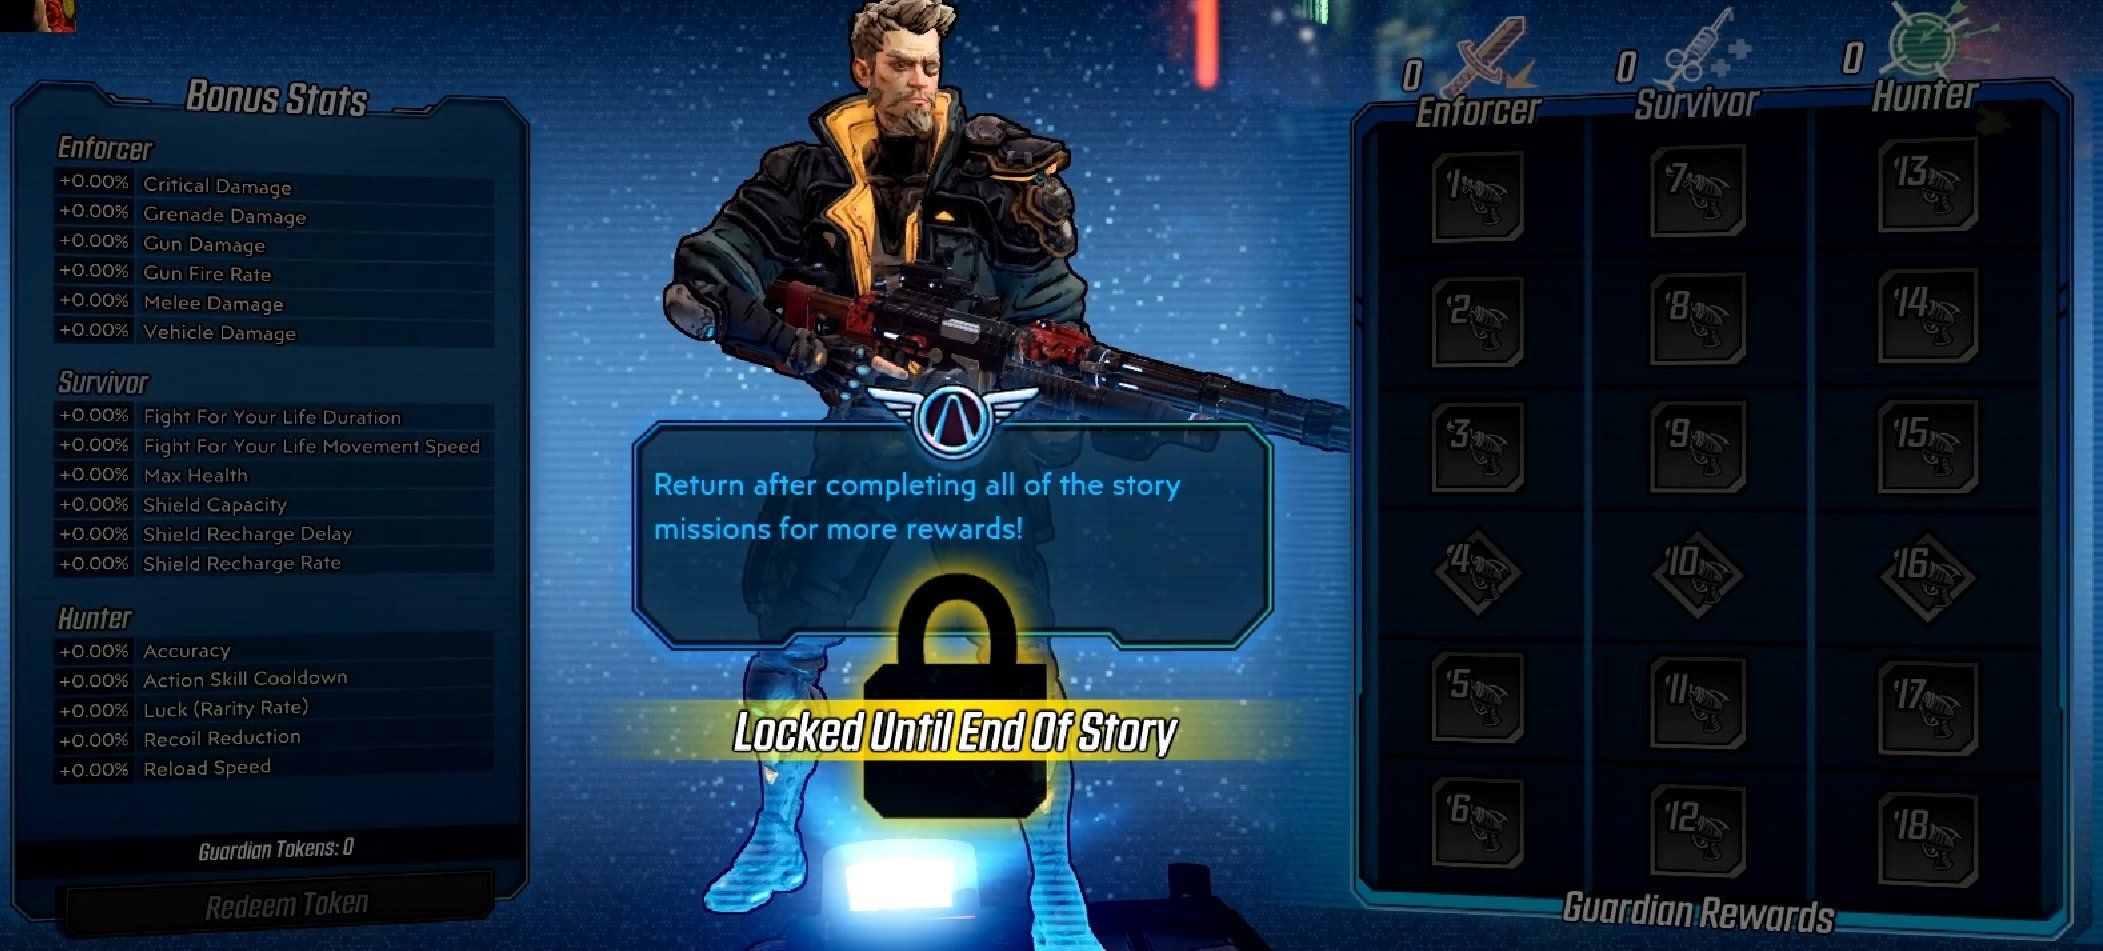 Borderlands 3 What Is the Level Cap?